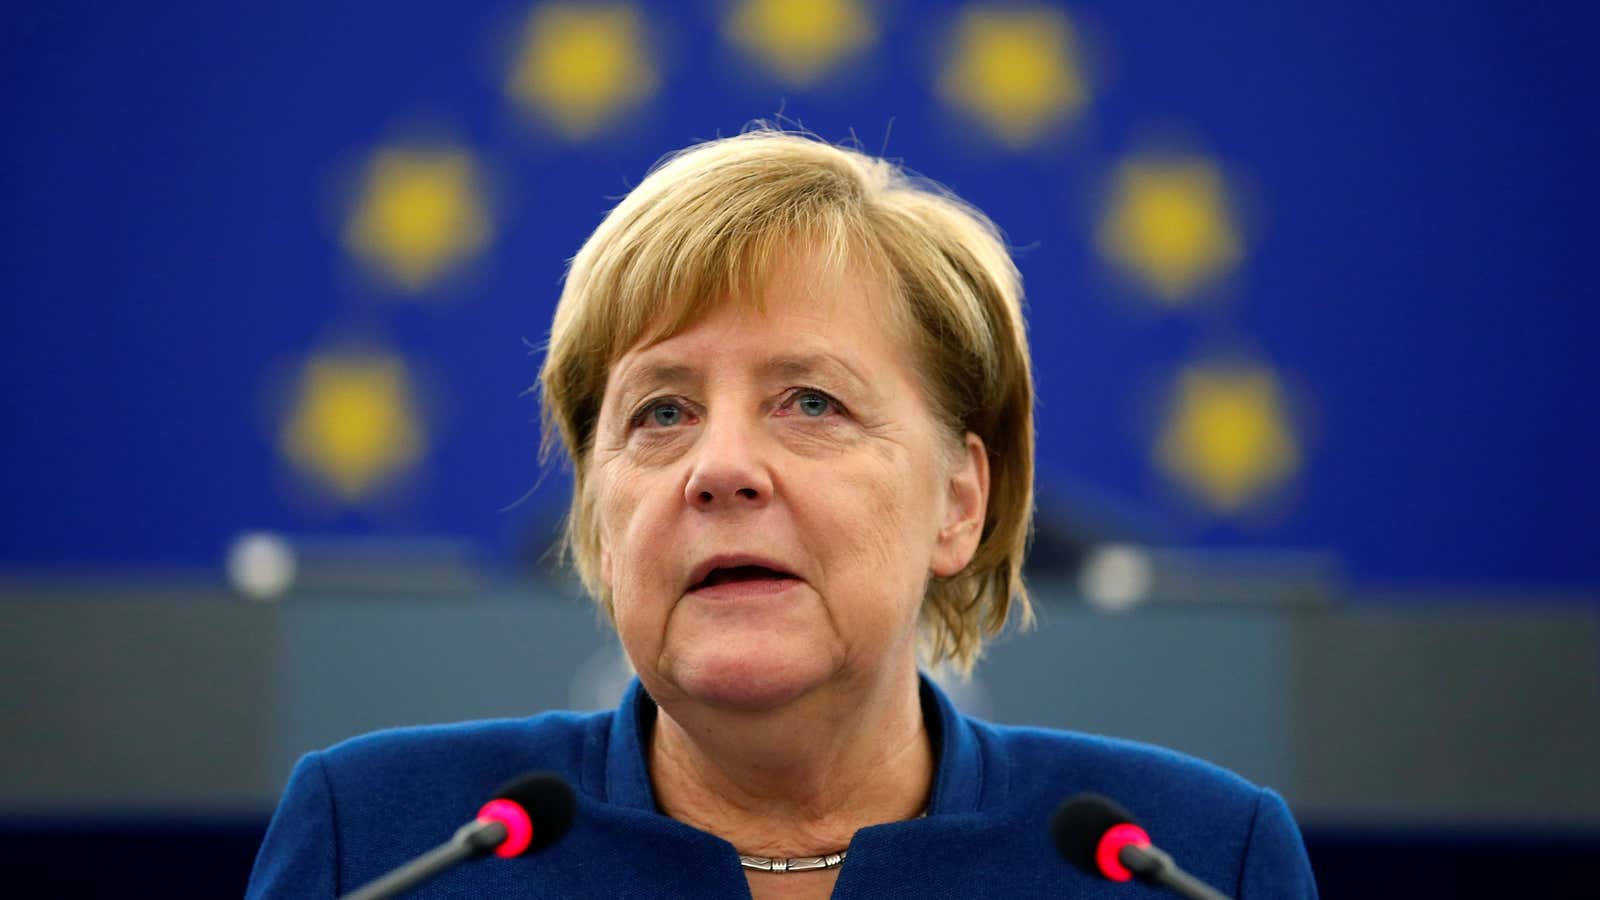 Angela Merkel lays out her vision for Europe.